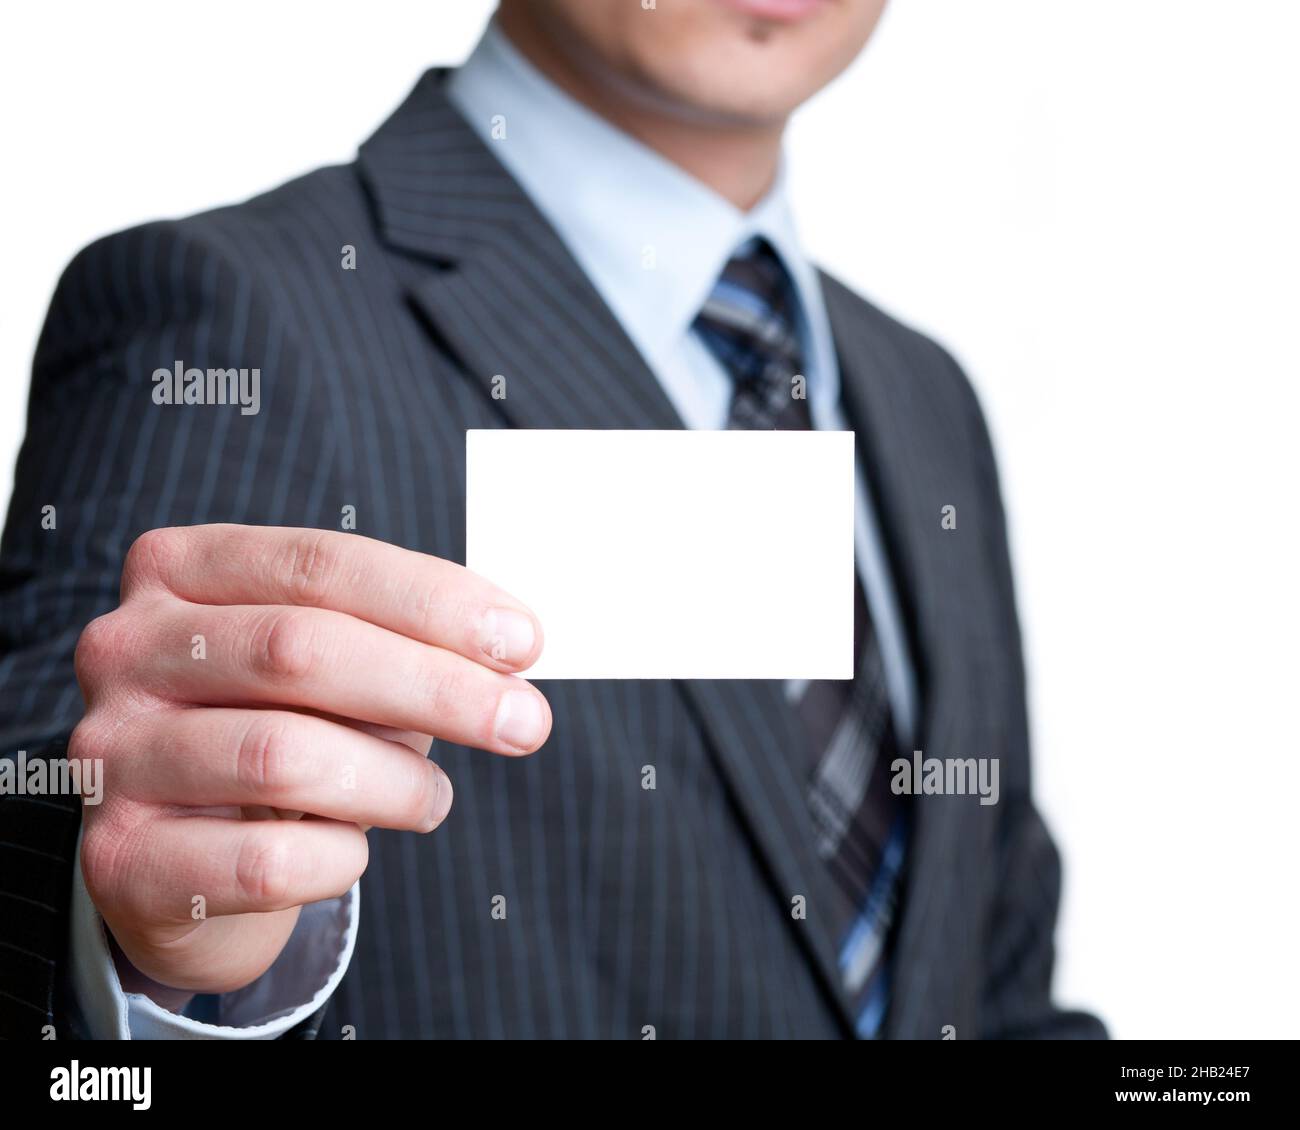 business card, card, businessman, business, sign, hand, free, meeting, name, man, address, contact name, paper, space, type, commercial, B2B, area, of Stock Photo